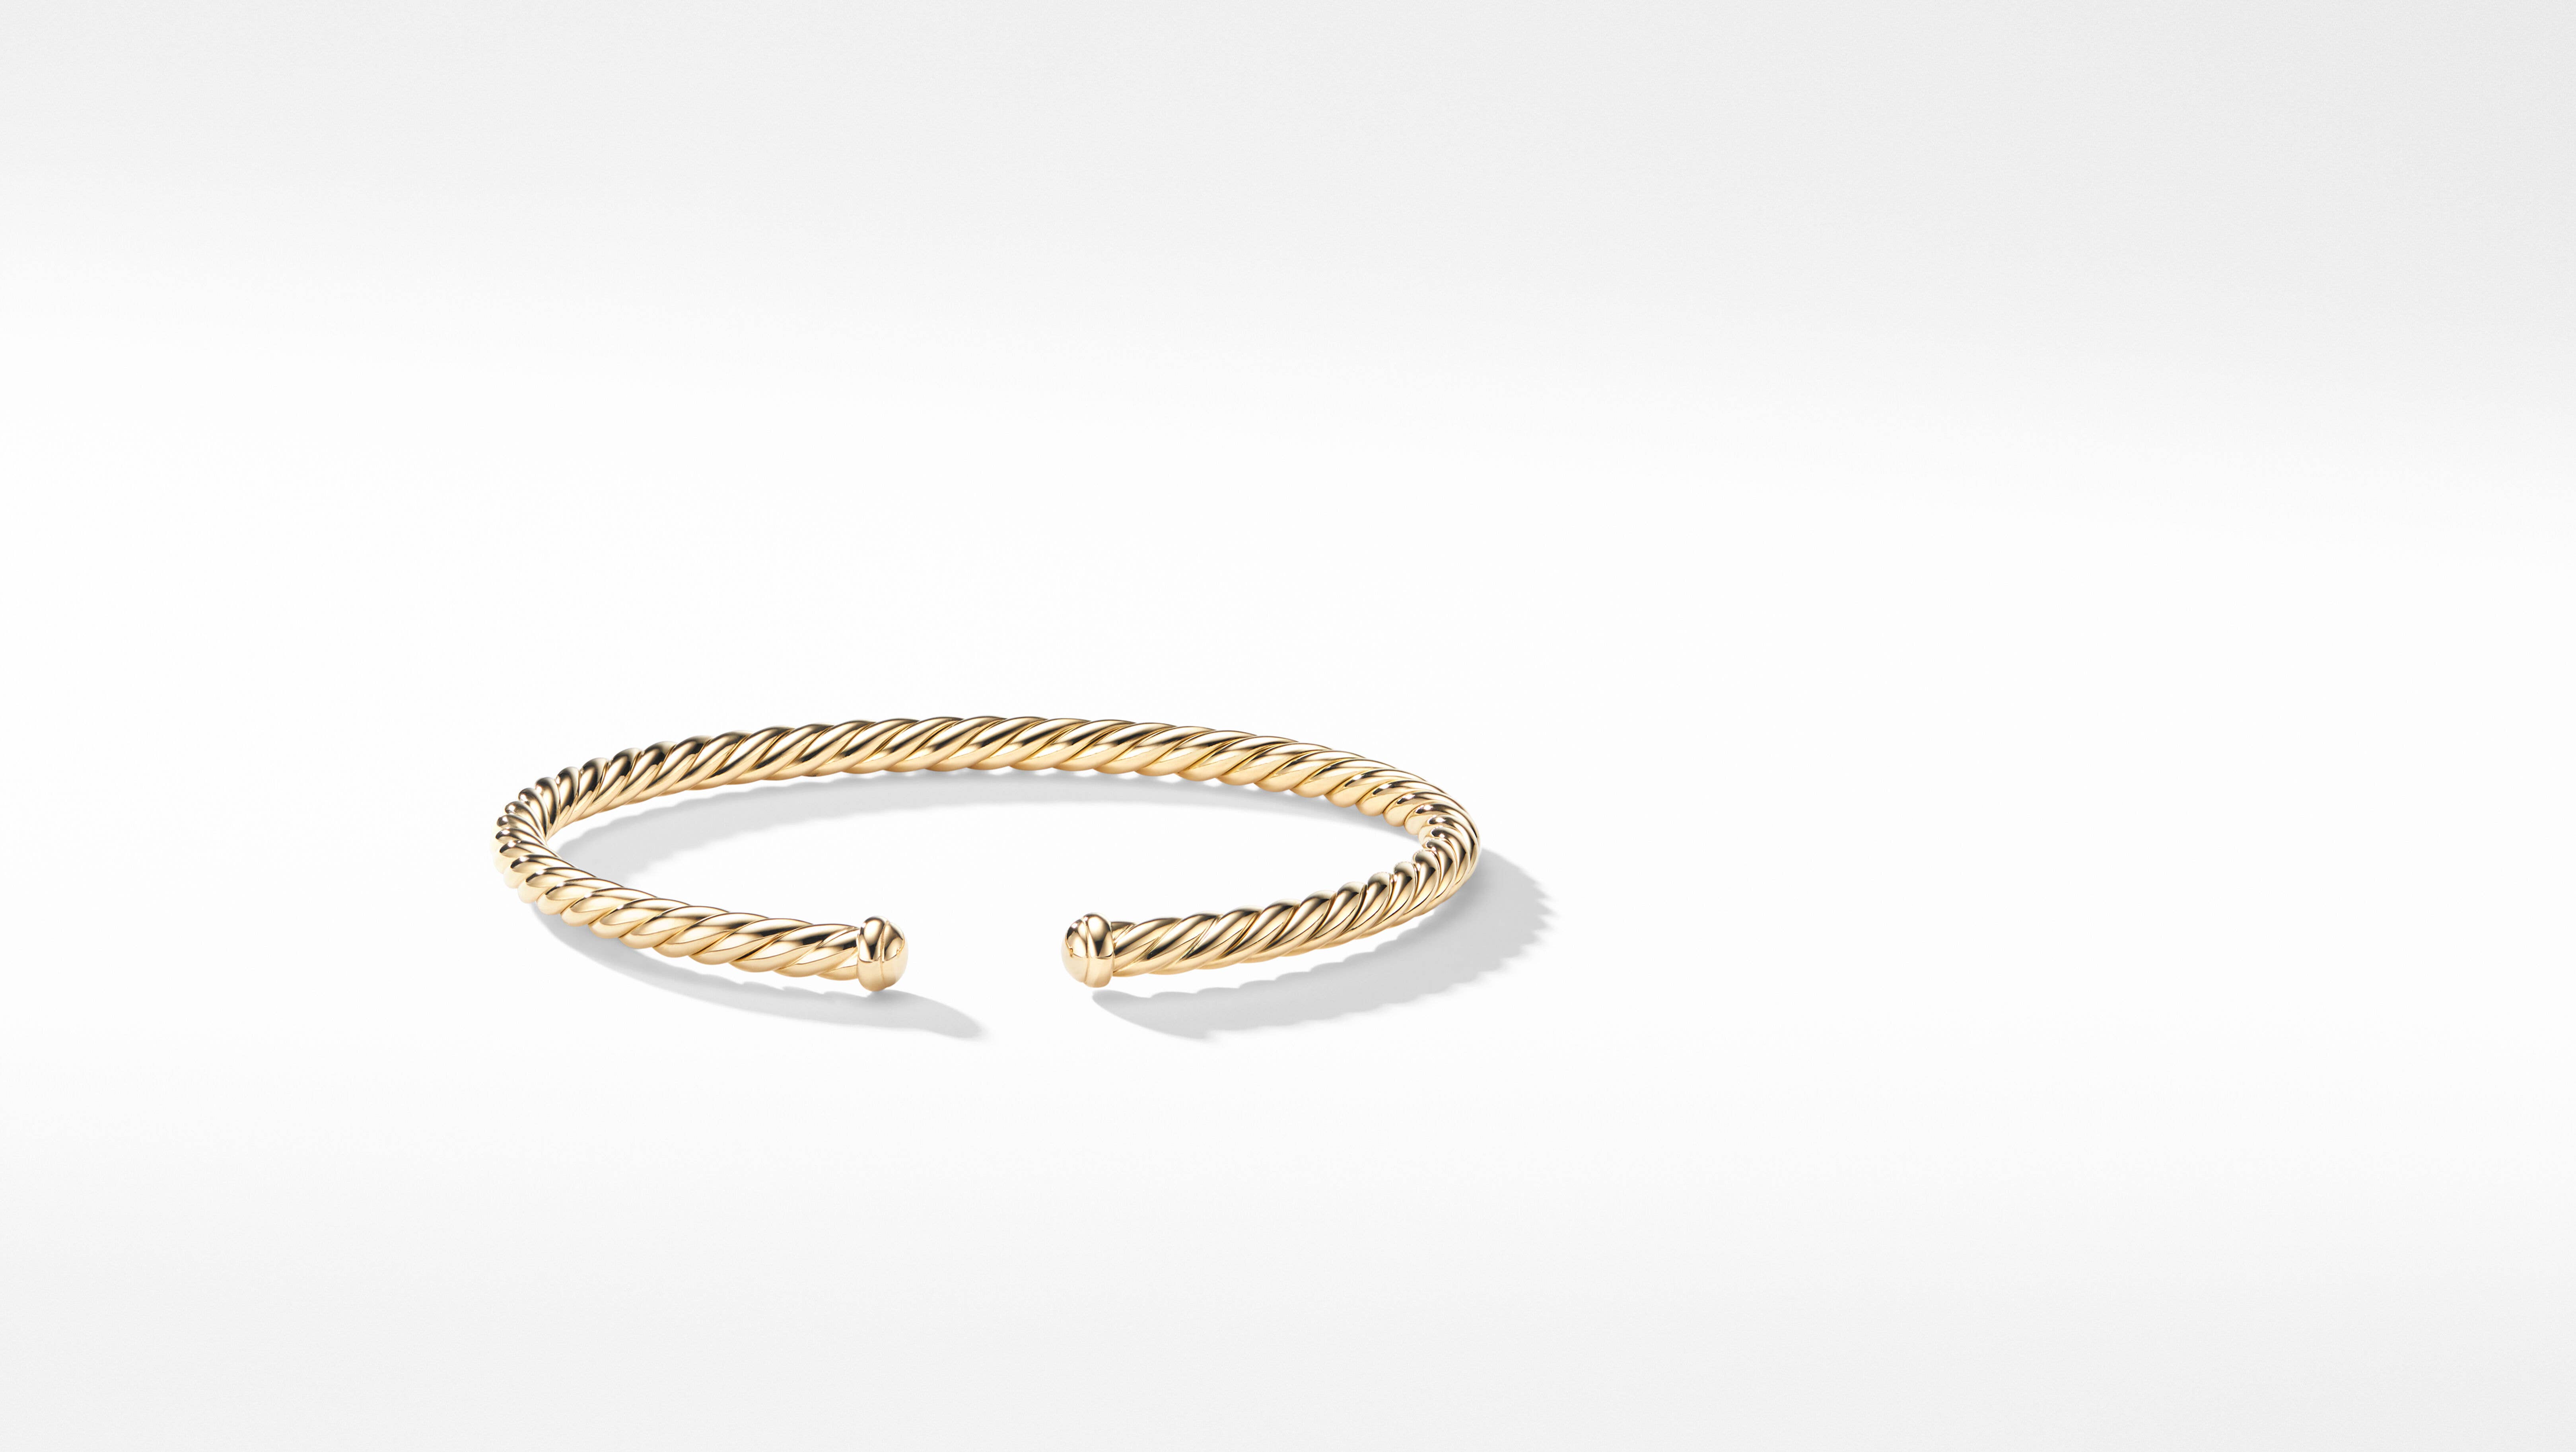 Cablespira® Bracelet in 18K Yellow Gold